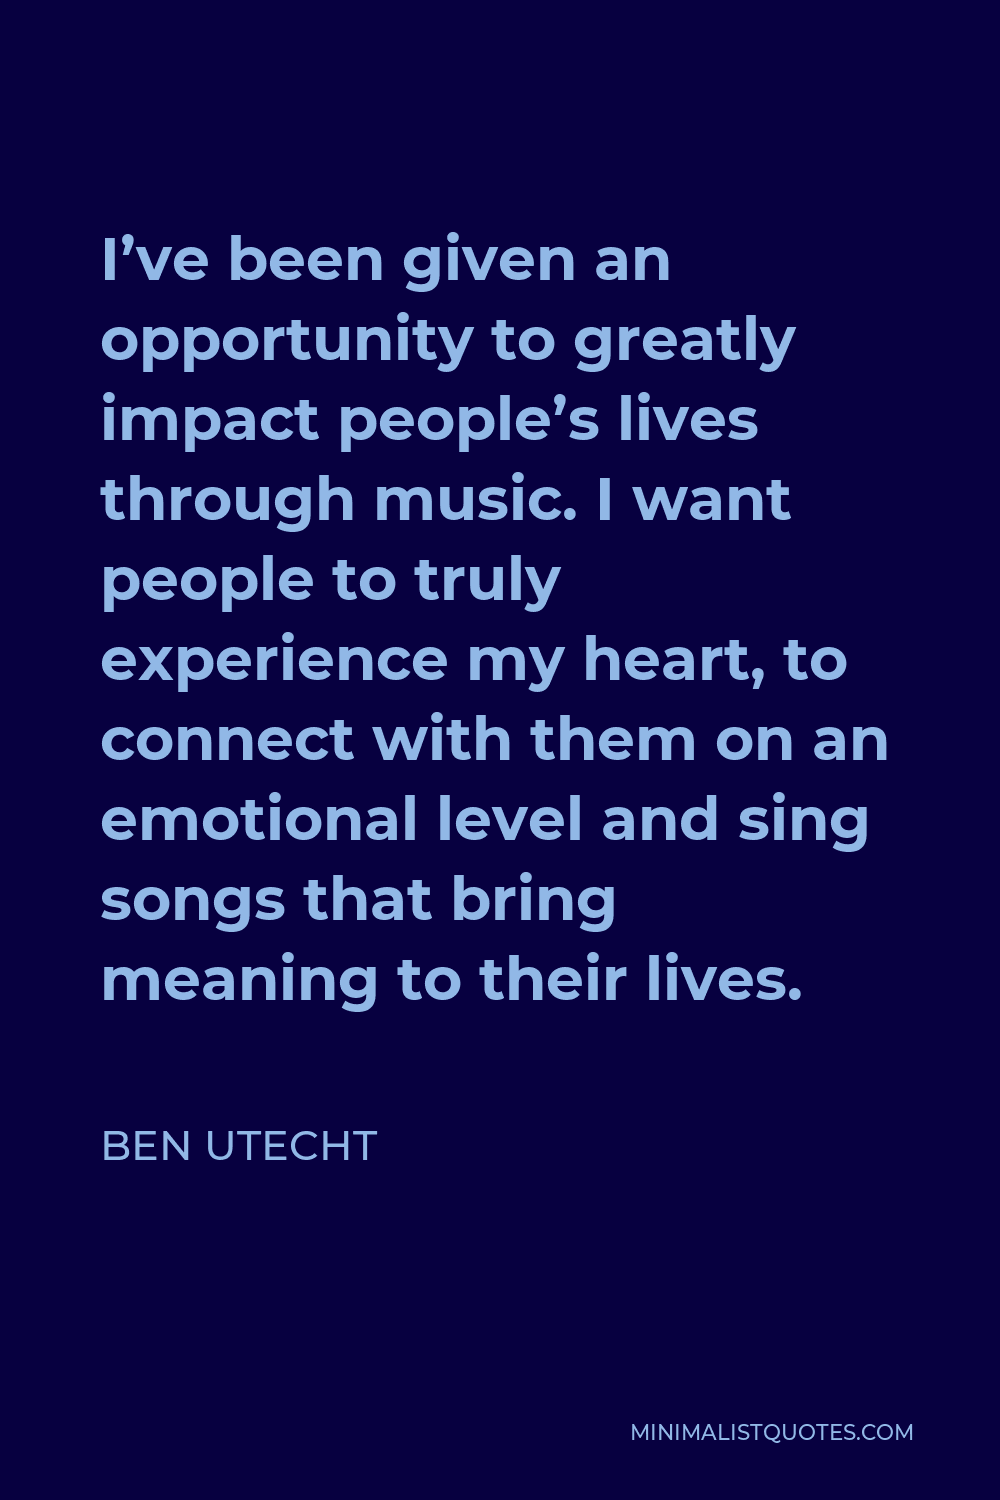 Ben Utecht Quote - I’ve been given an opportunity to greatly impact people’s lives through music. I want people to truly experience my heart, to connect with them on an emotional level and sing songs that bring meaning to their lives.